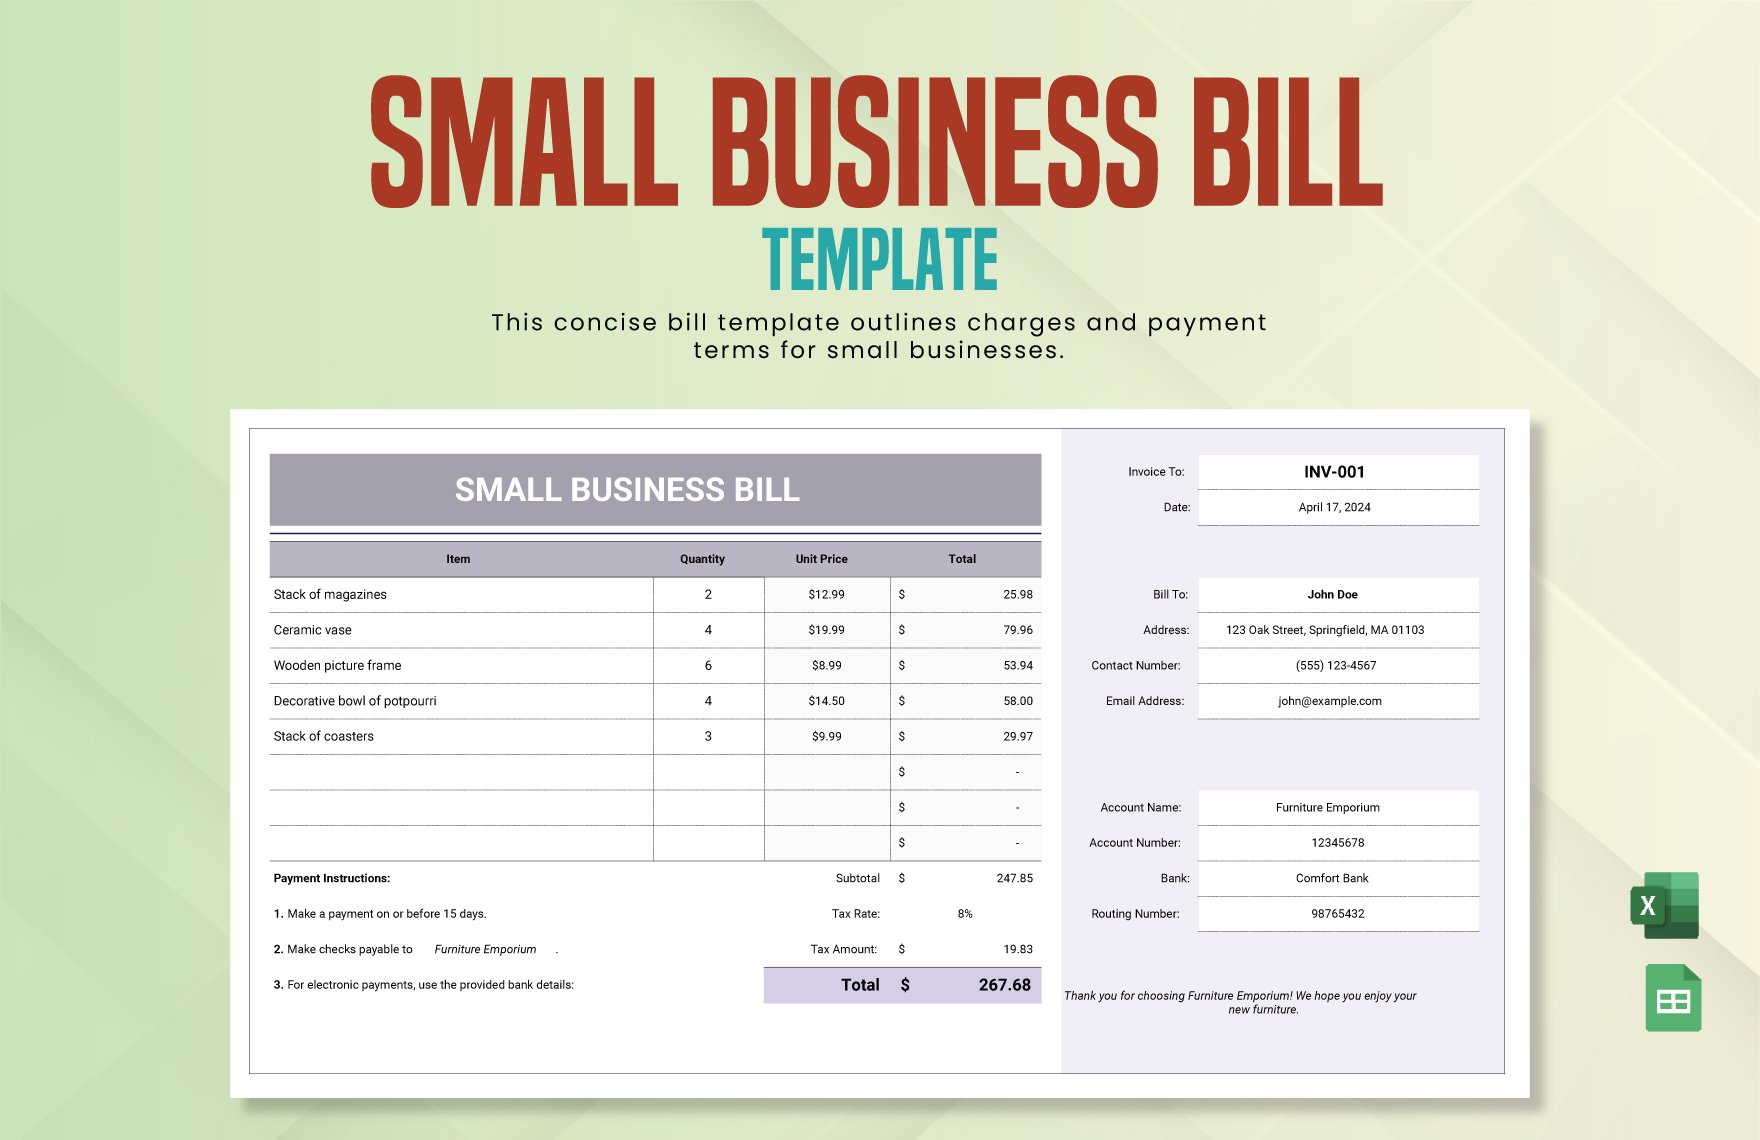 Small Business Bill Template in Excel, Google Sheets